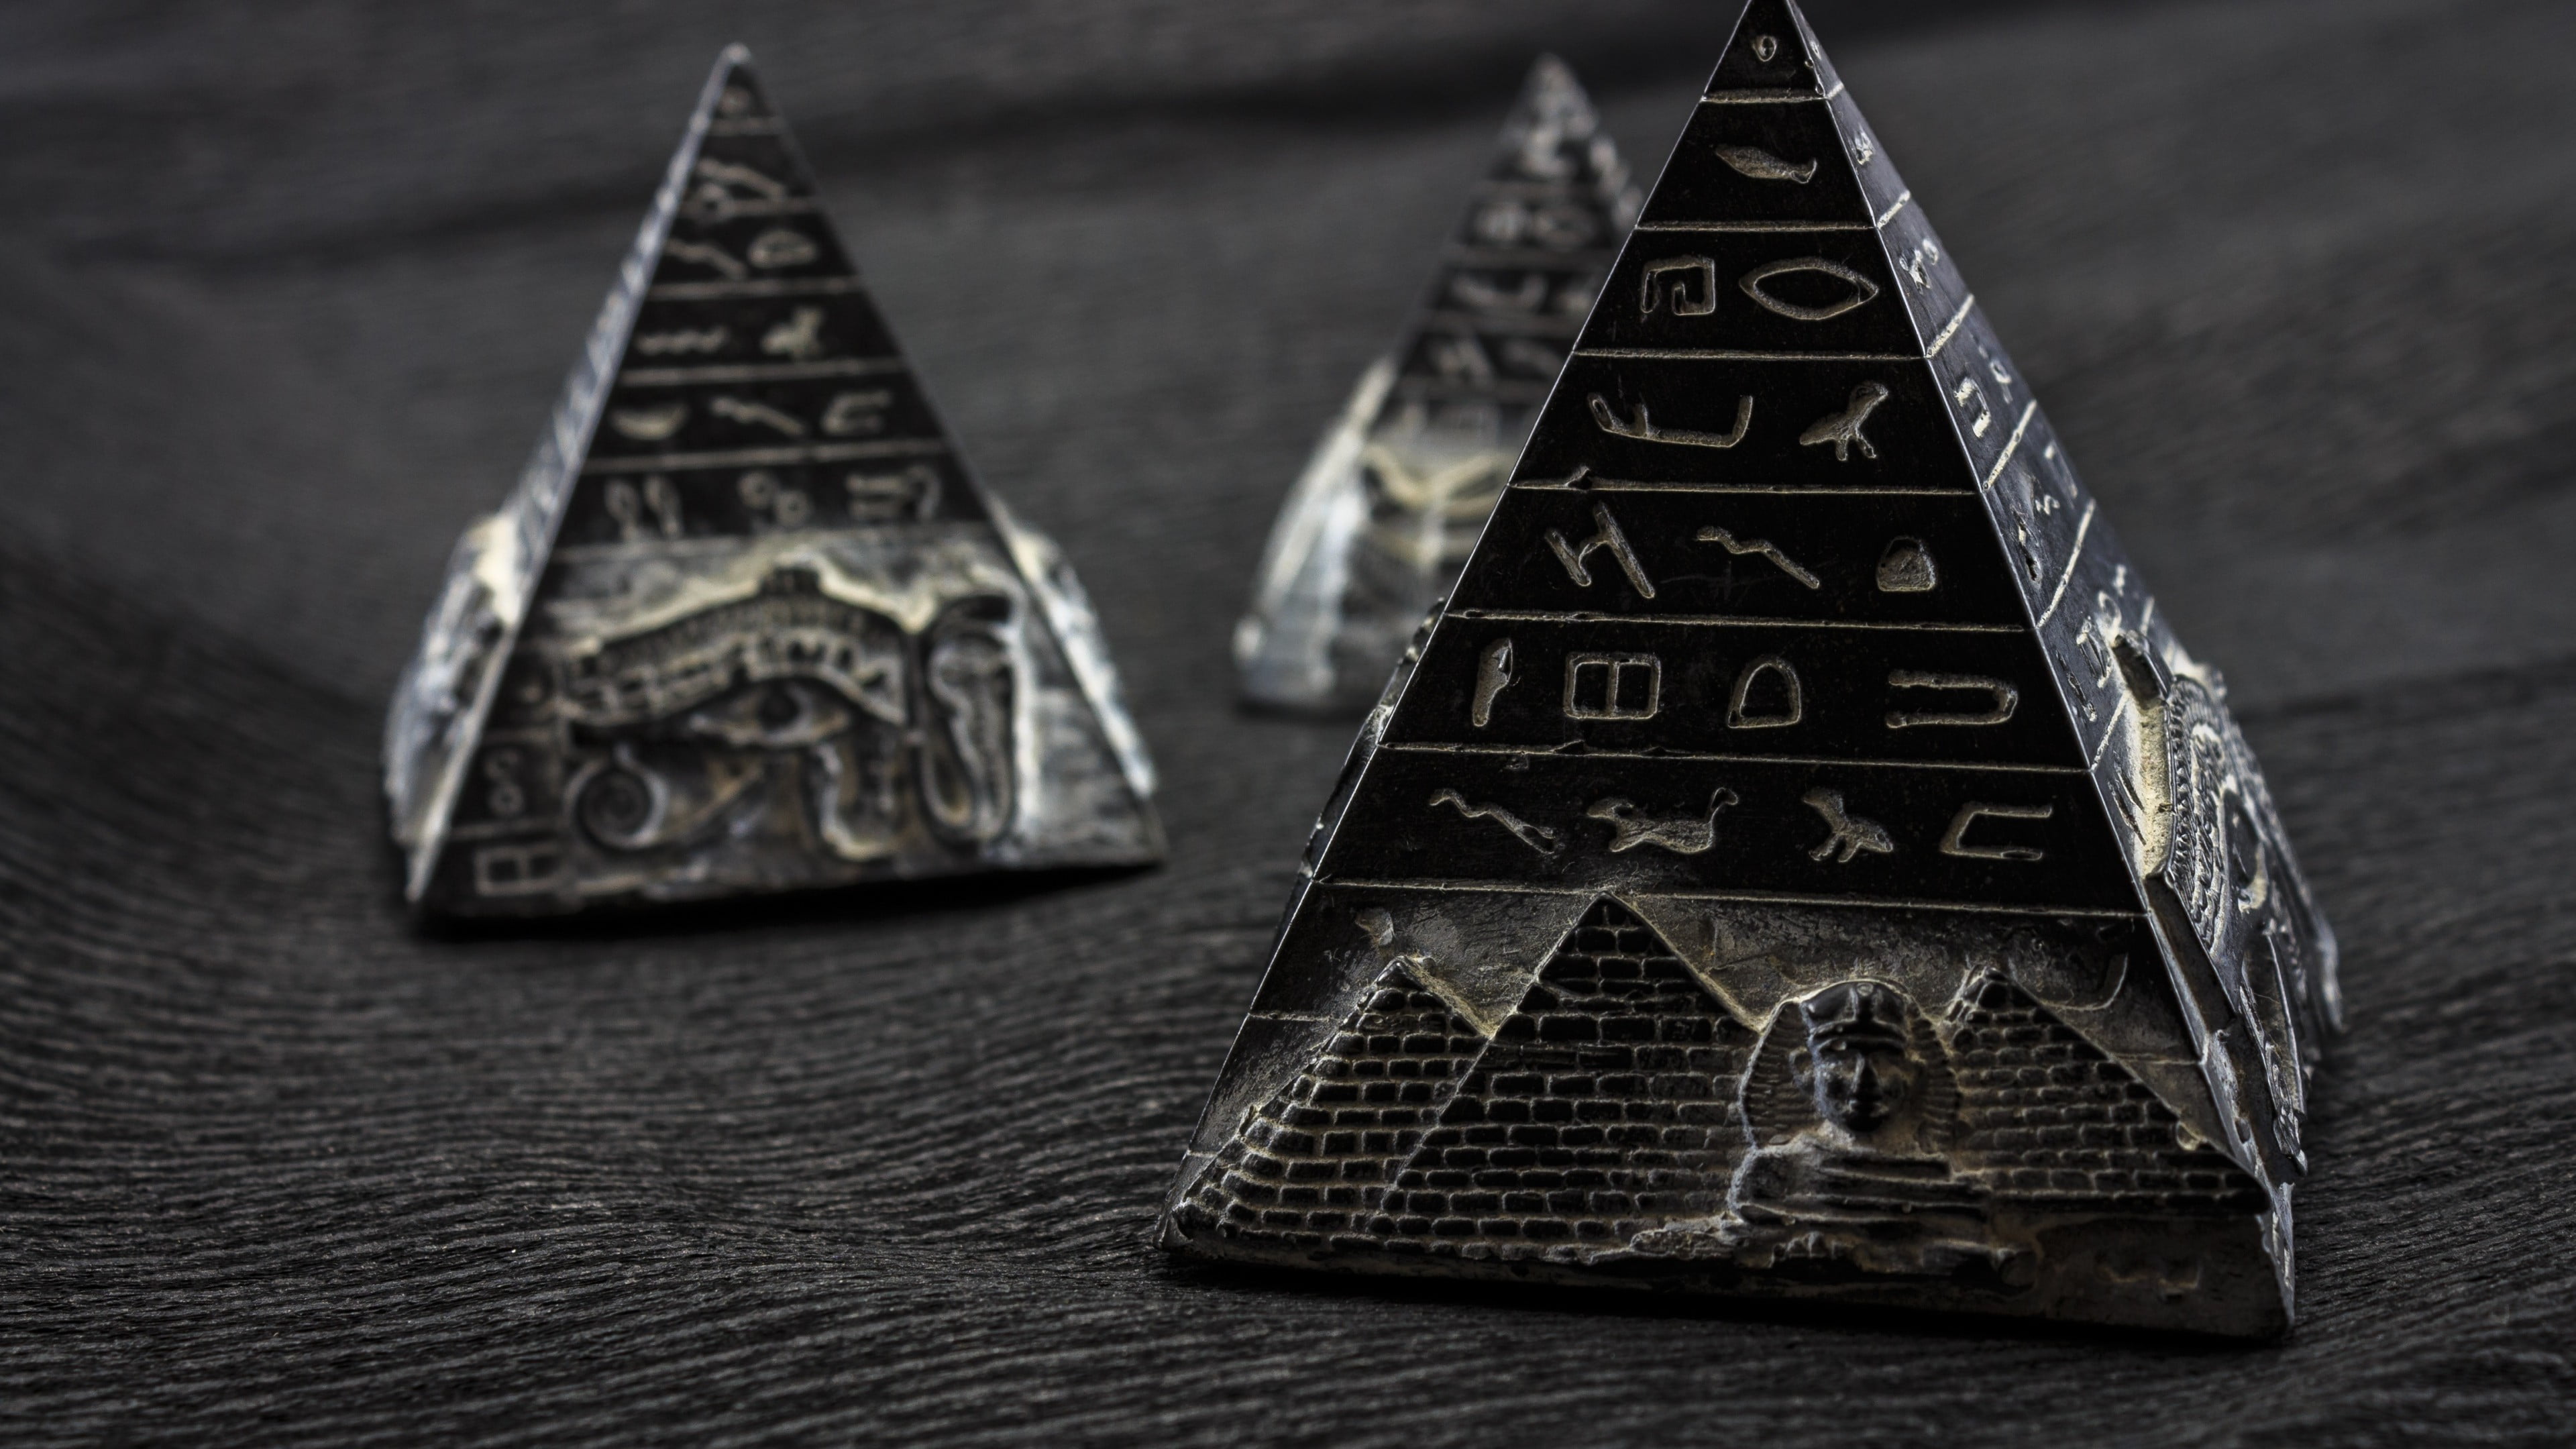 Black And White Wooden Table Pyramid Hieroglyphs Hd Wallpaper Images, Photos, Reviews